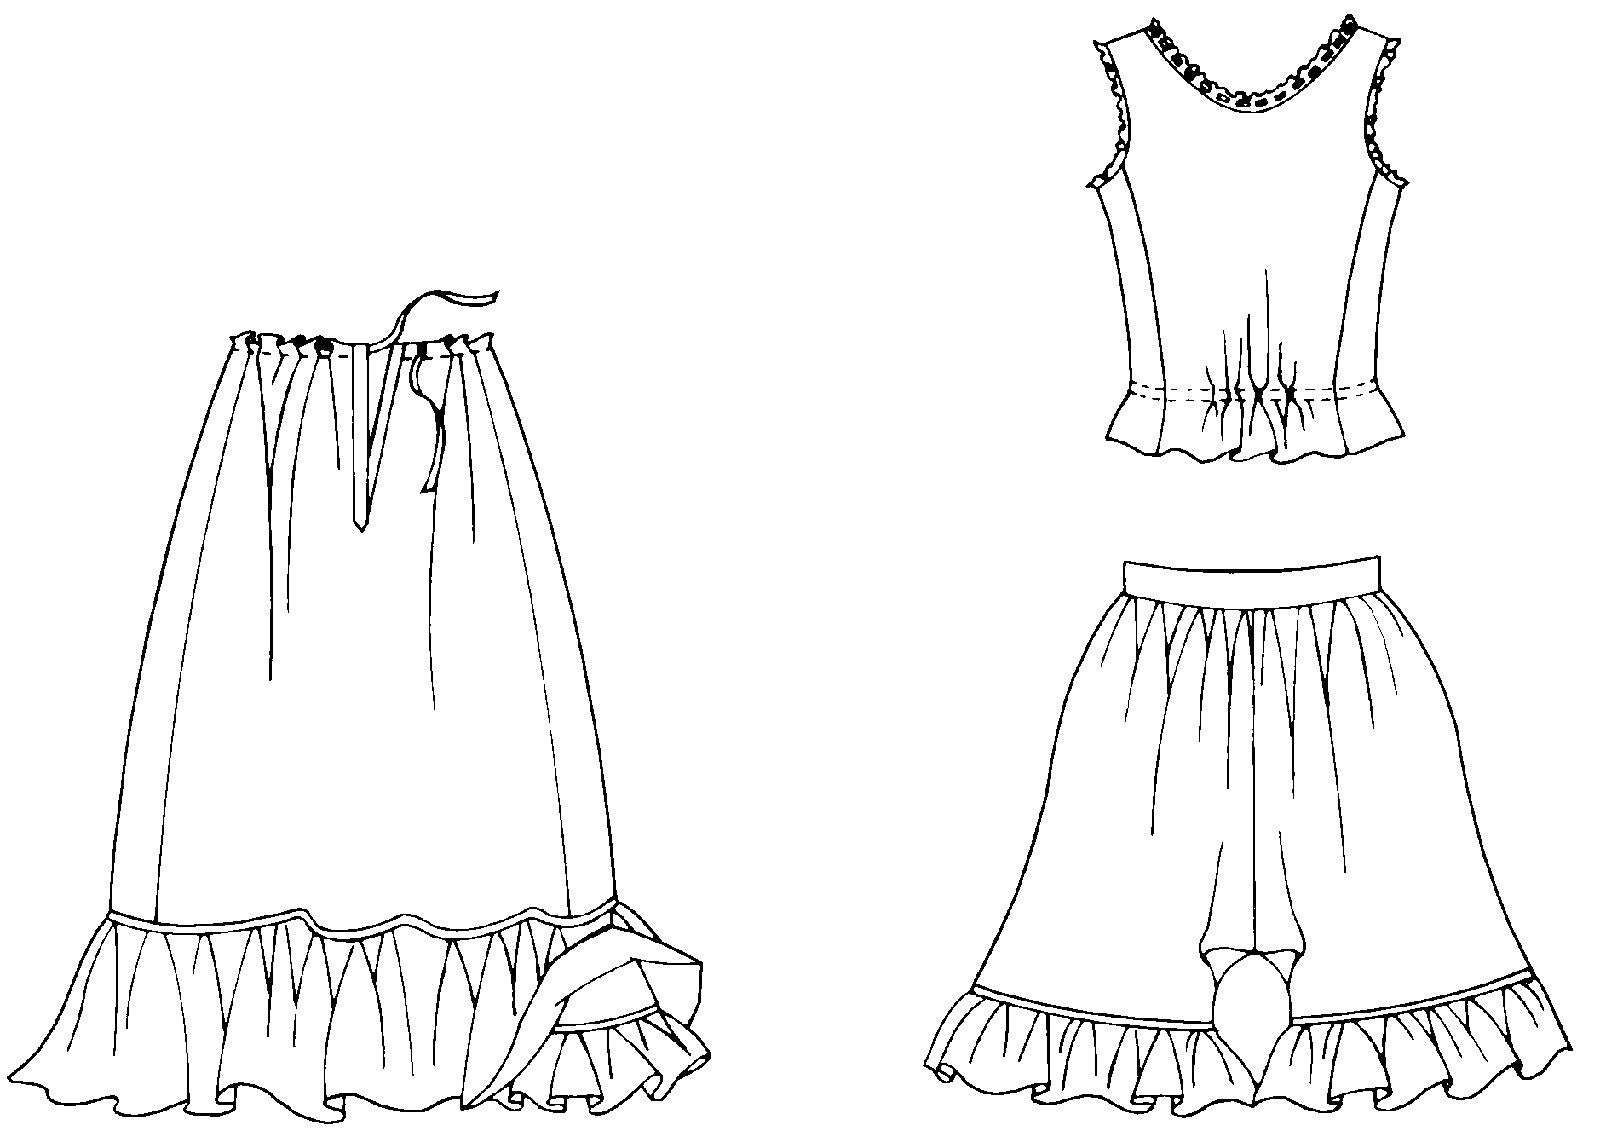 Flat line drawing of back views of camisole, petticoat, and drawers. 